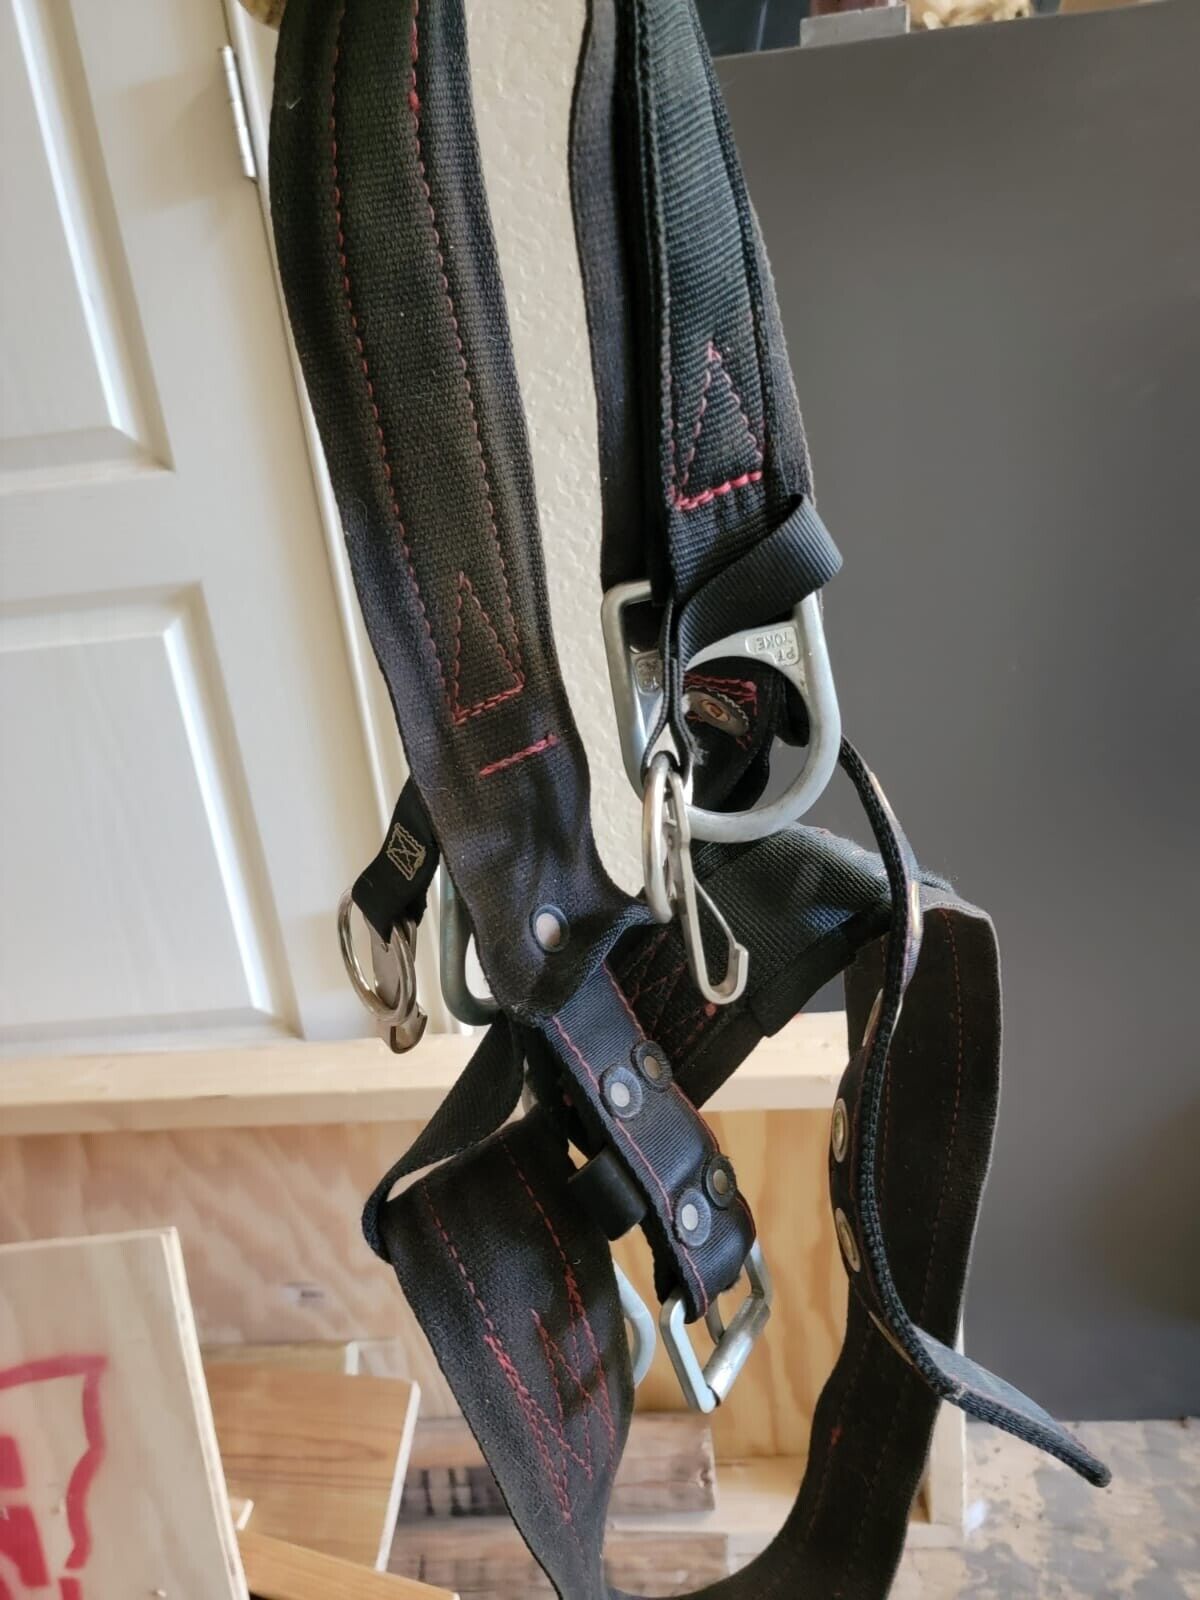 Pre-owned Sherrill Tree Climbing Harness For Position Only Not Fall Assist ~161